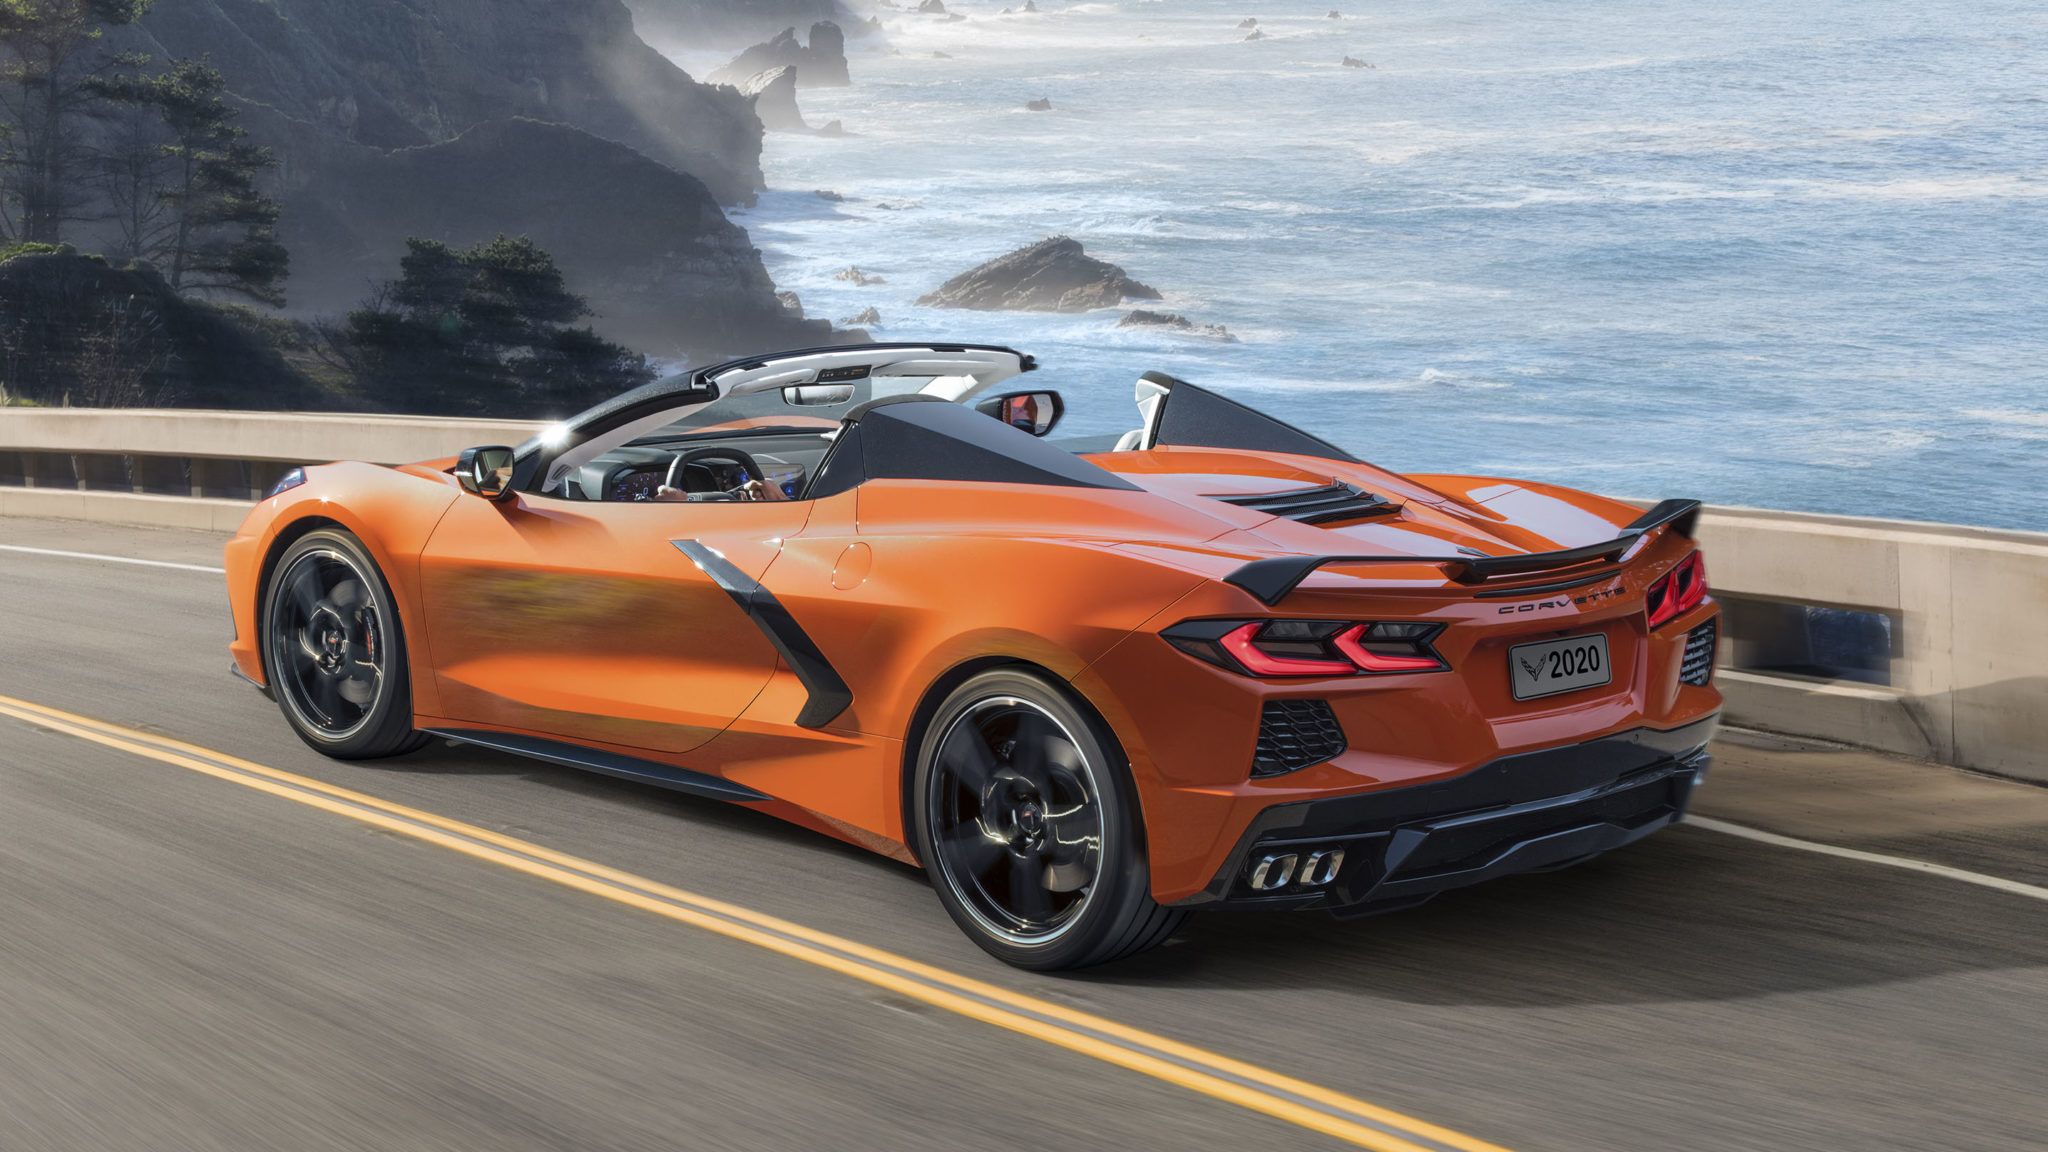 REVEALED: 2020 Chevrolet Corvette C8 Convertible First Official